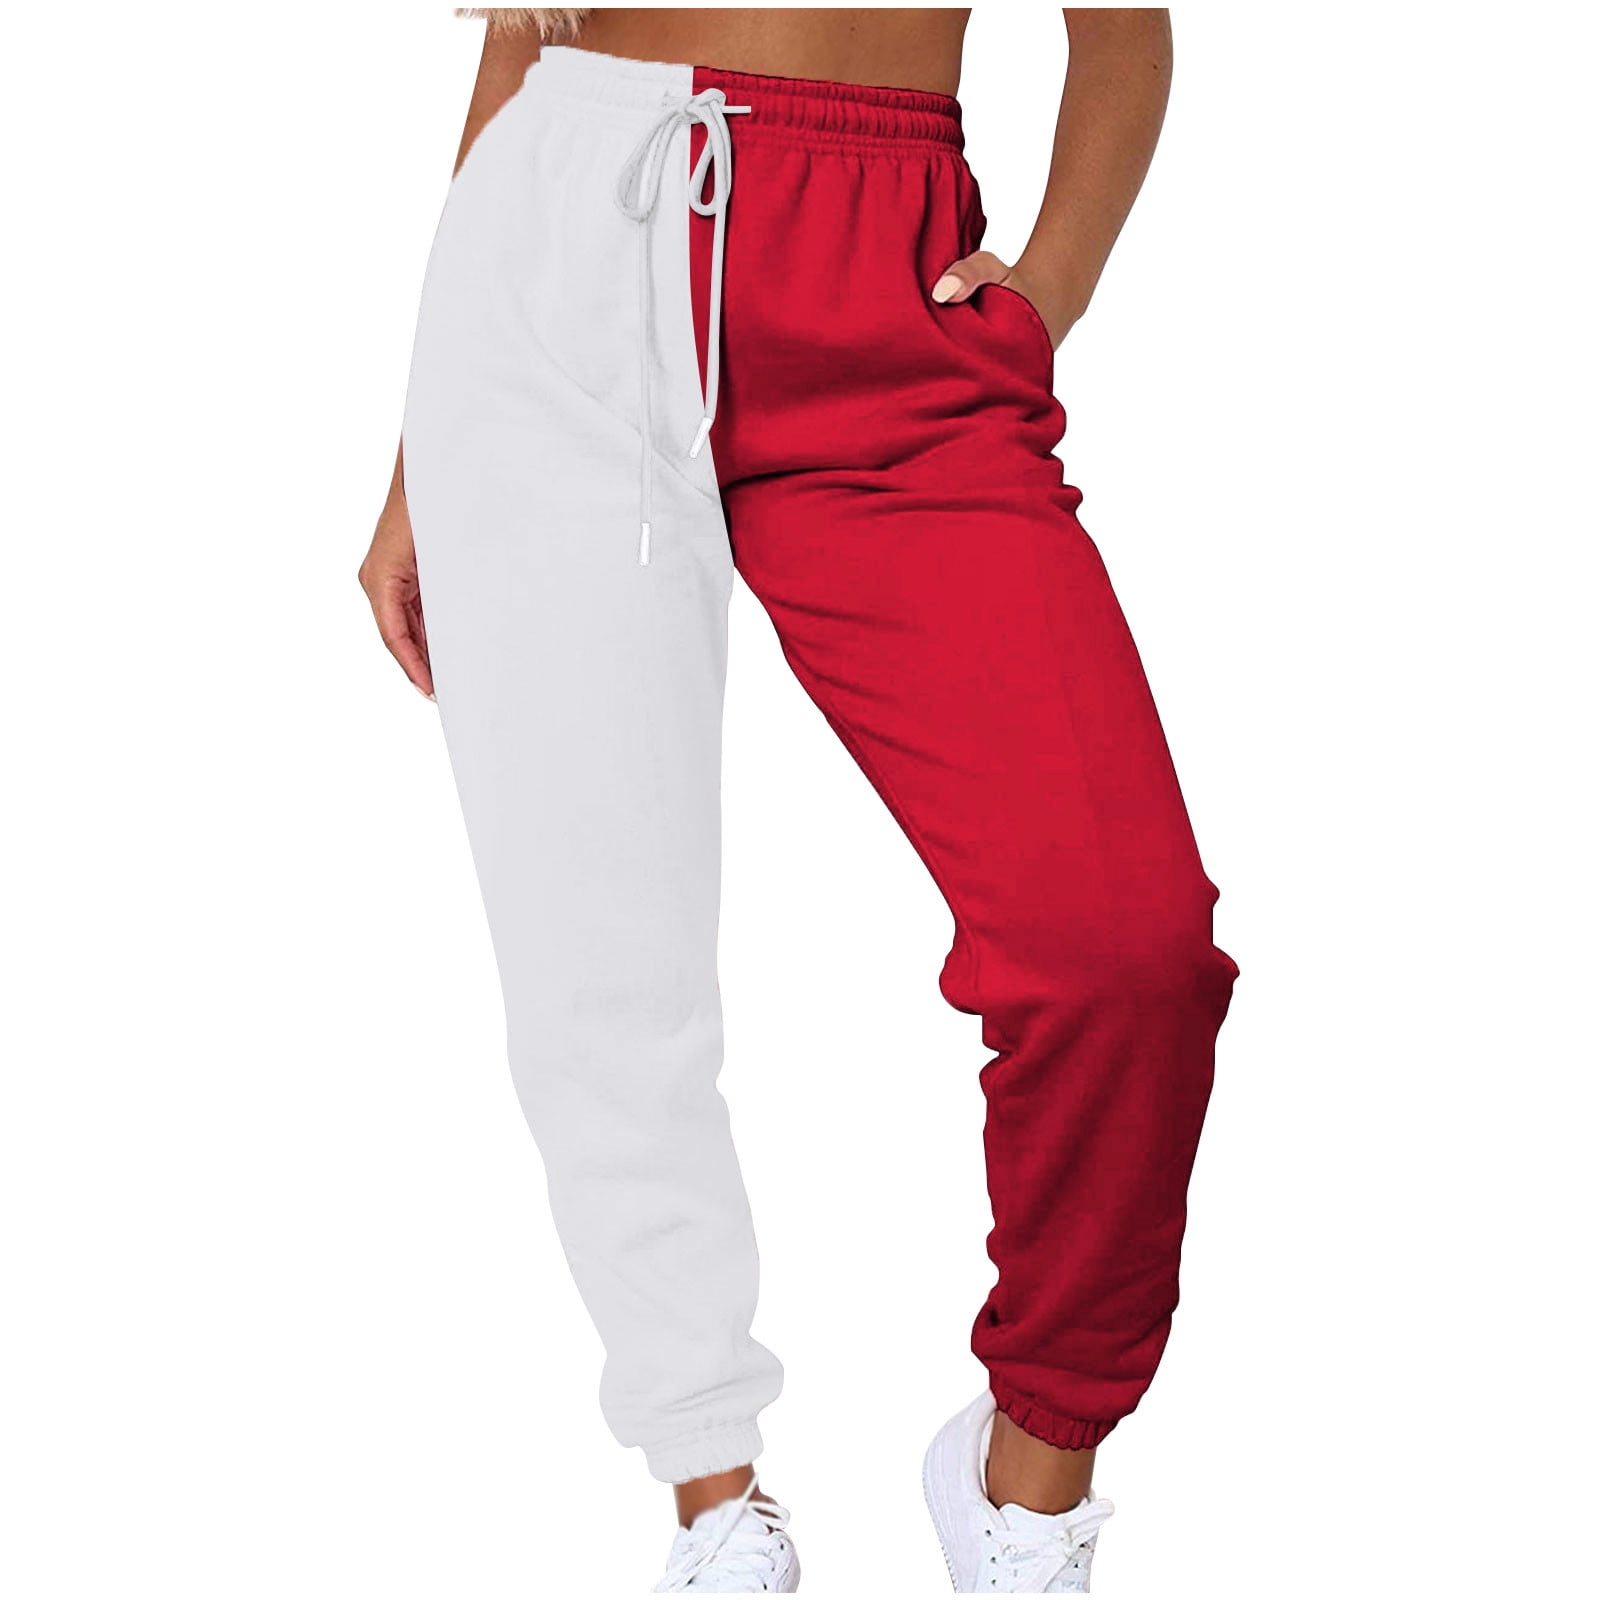 XFLWAM Women's Elastic High Waist Drawstring Joggers Pants Color Block  Baggy Sweatpants with Pockets Gym Running Pants Red M